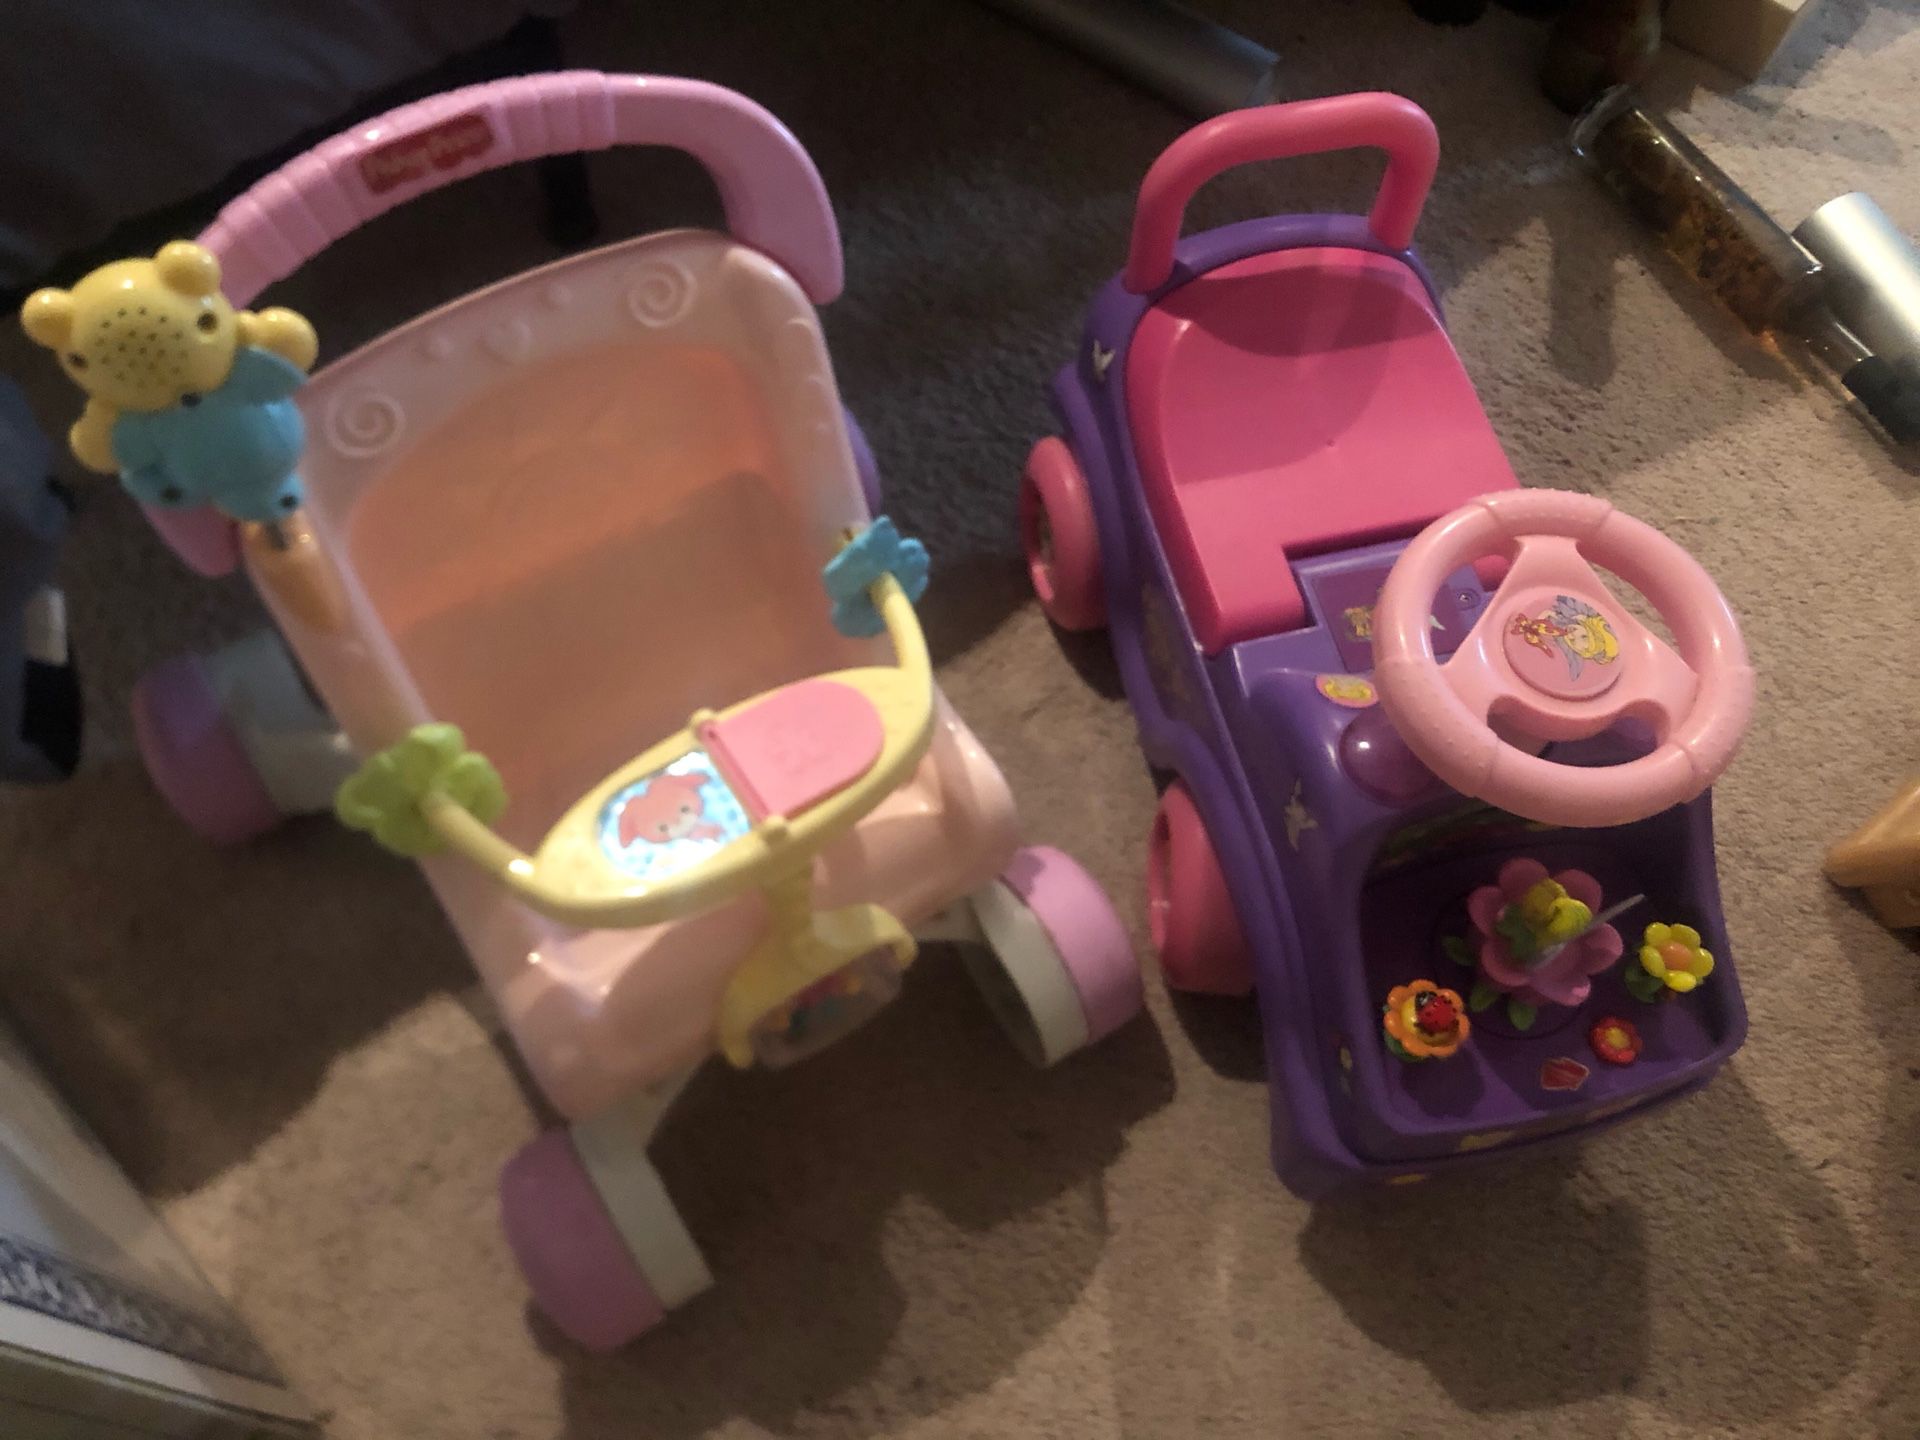 Two push toys For little girls, one is musical